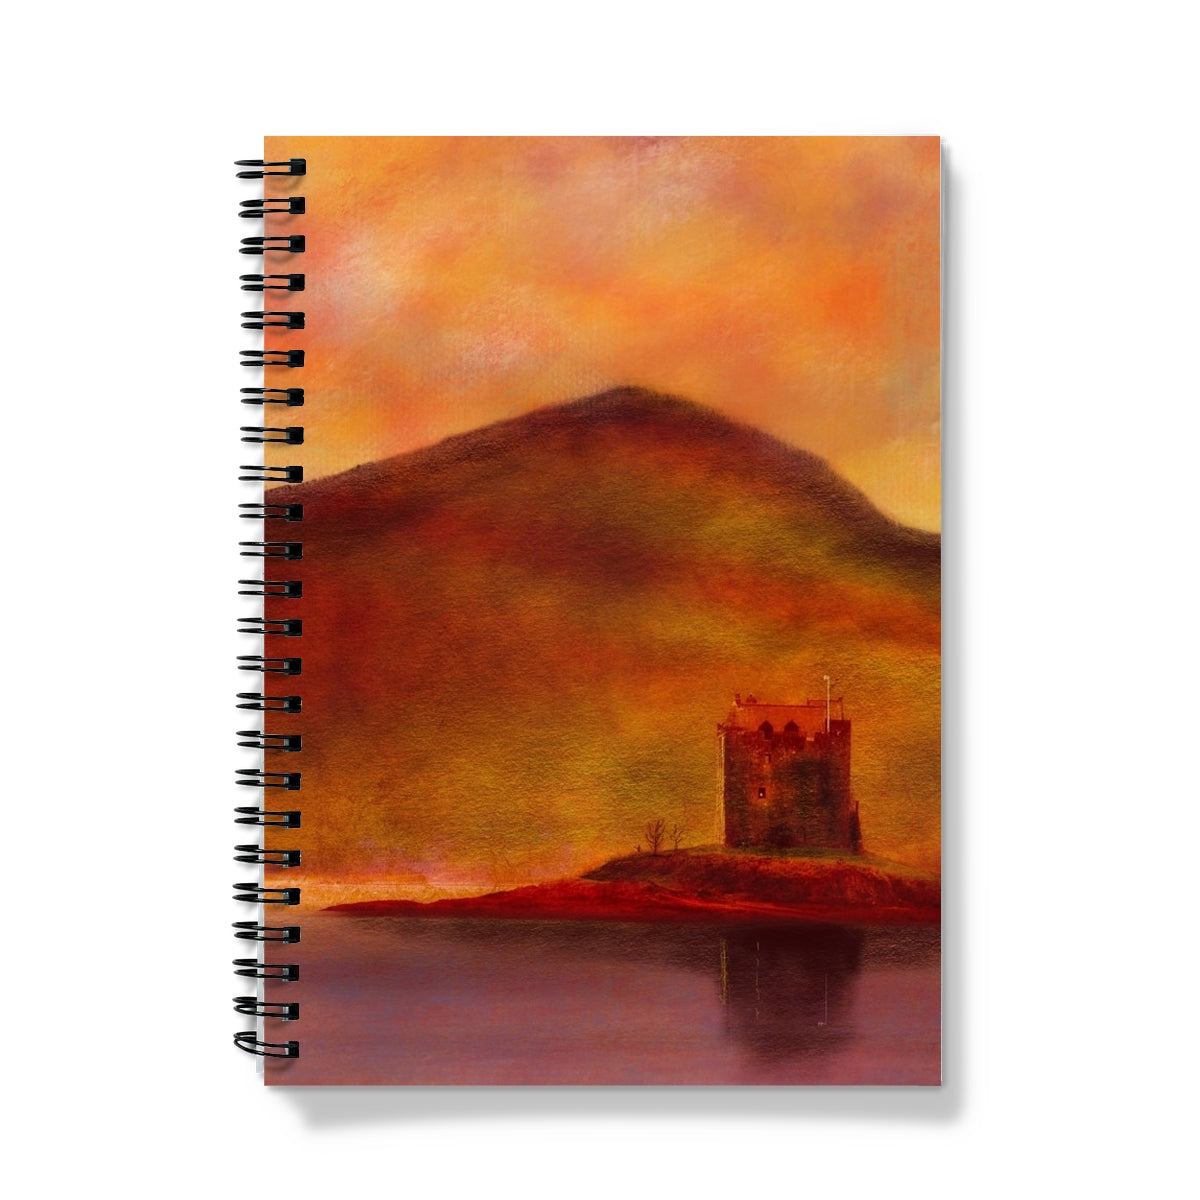 Castle Stalker Sunset Art Gifts Notebook-Journals & Notebooks-Historic & Iconic Scotland Art Gallery-A5-Lined-Paintings, Prints, Homeware, Art Gifts From Scotland By Scottish Artist Kevin Hunter